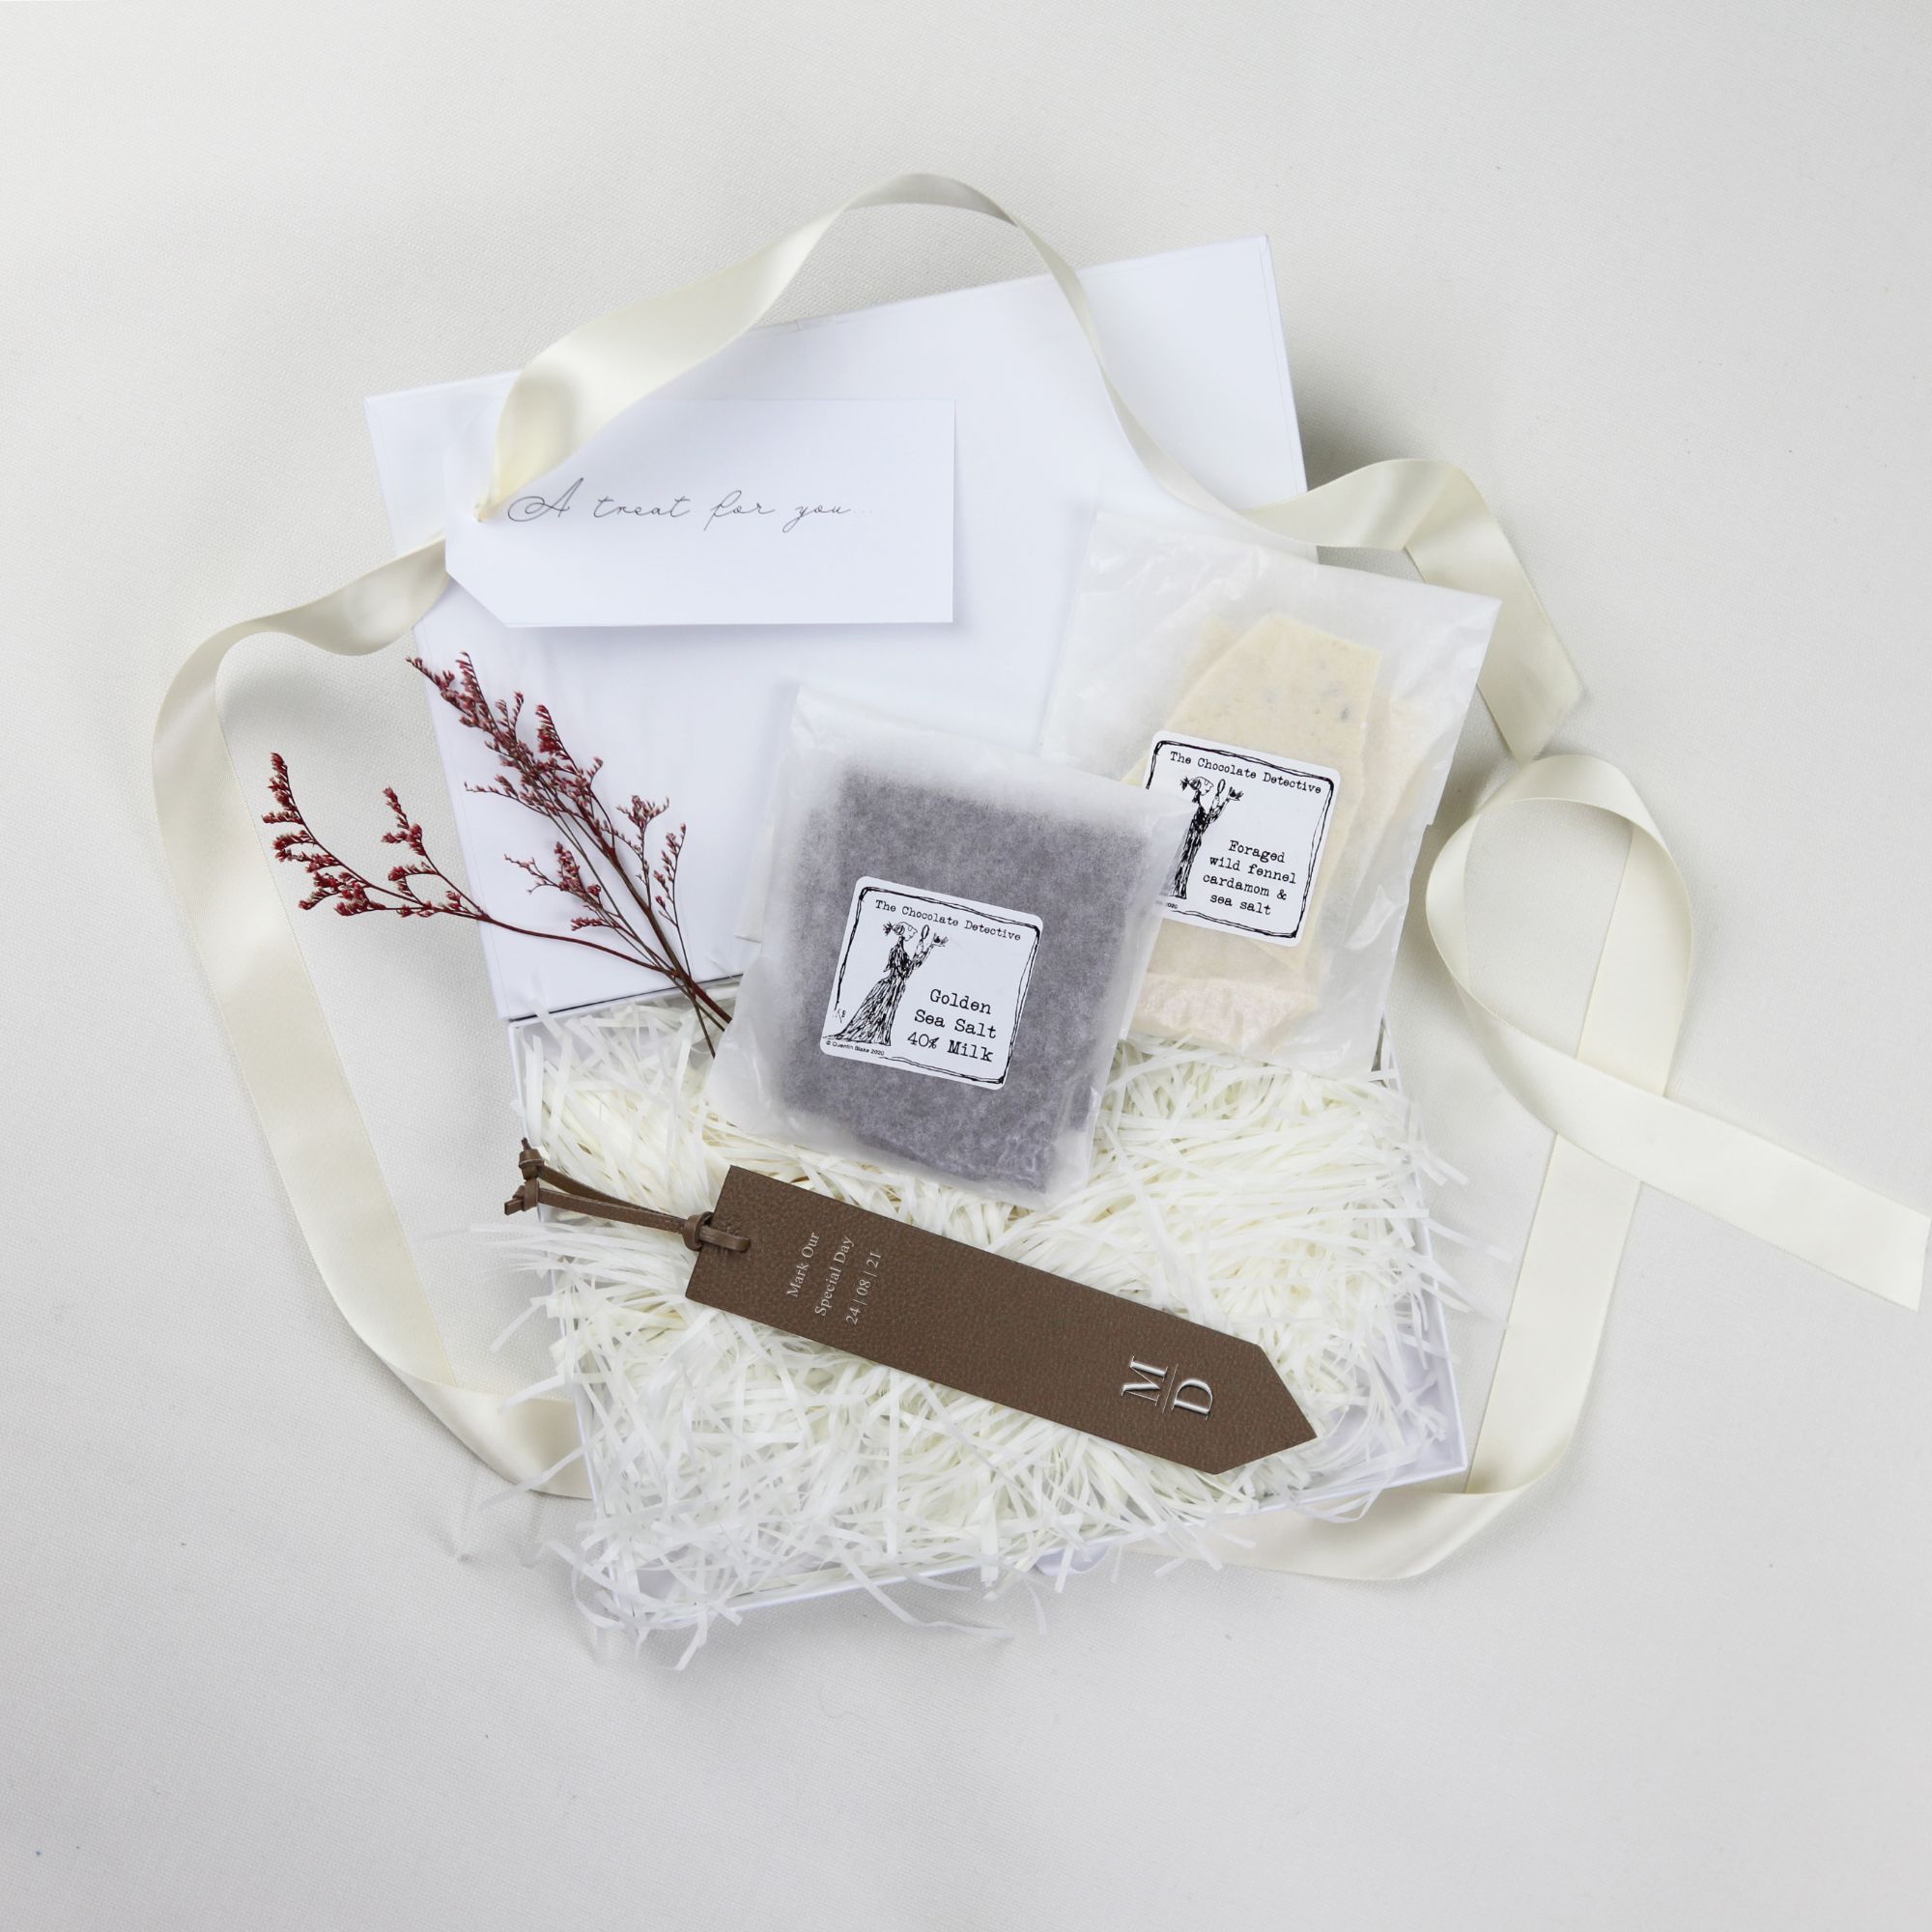 Gift box for readers and writers with branded leather bookmark and milk, dark, white chocolate